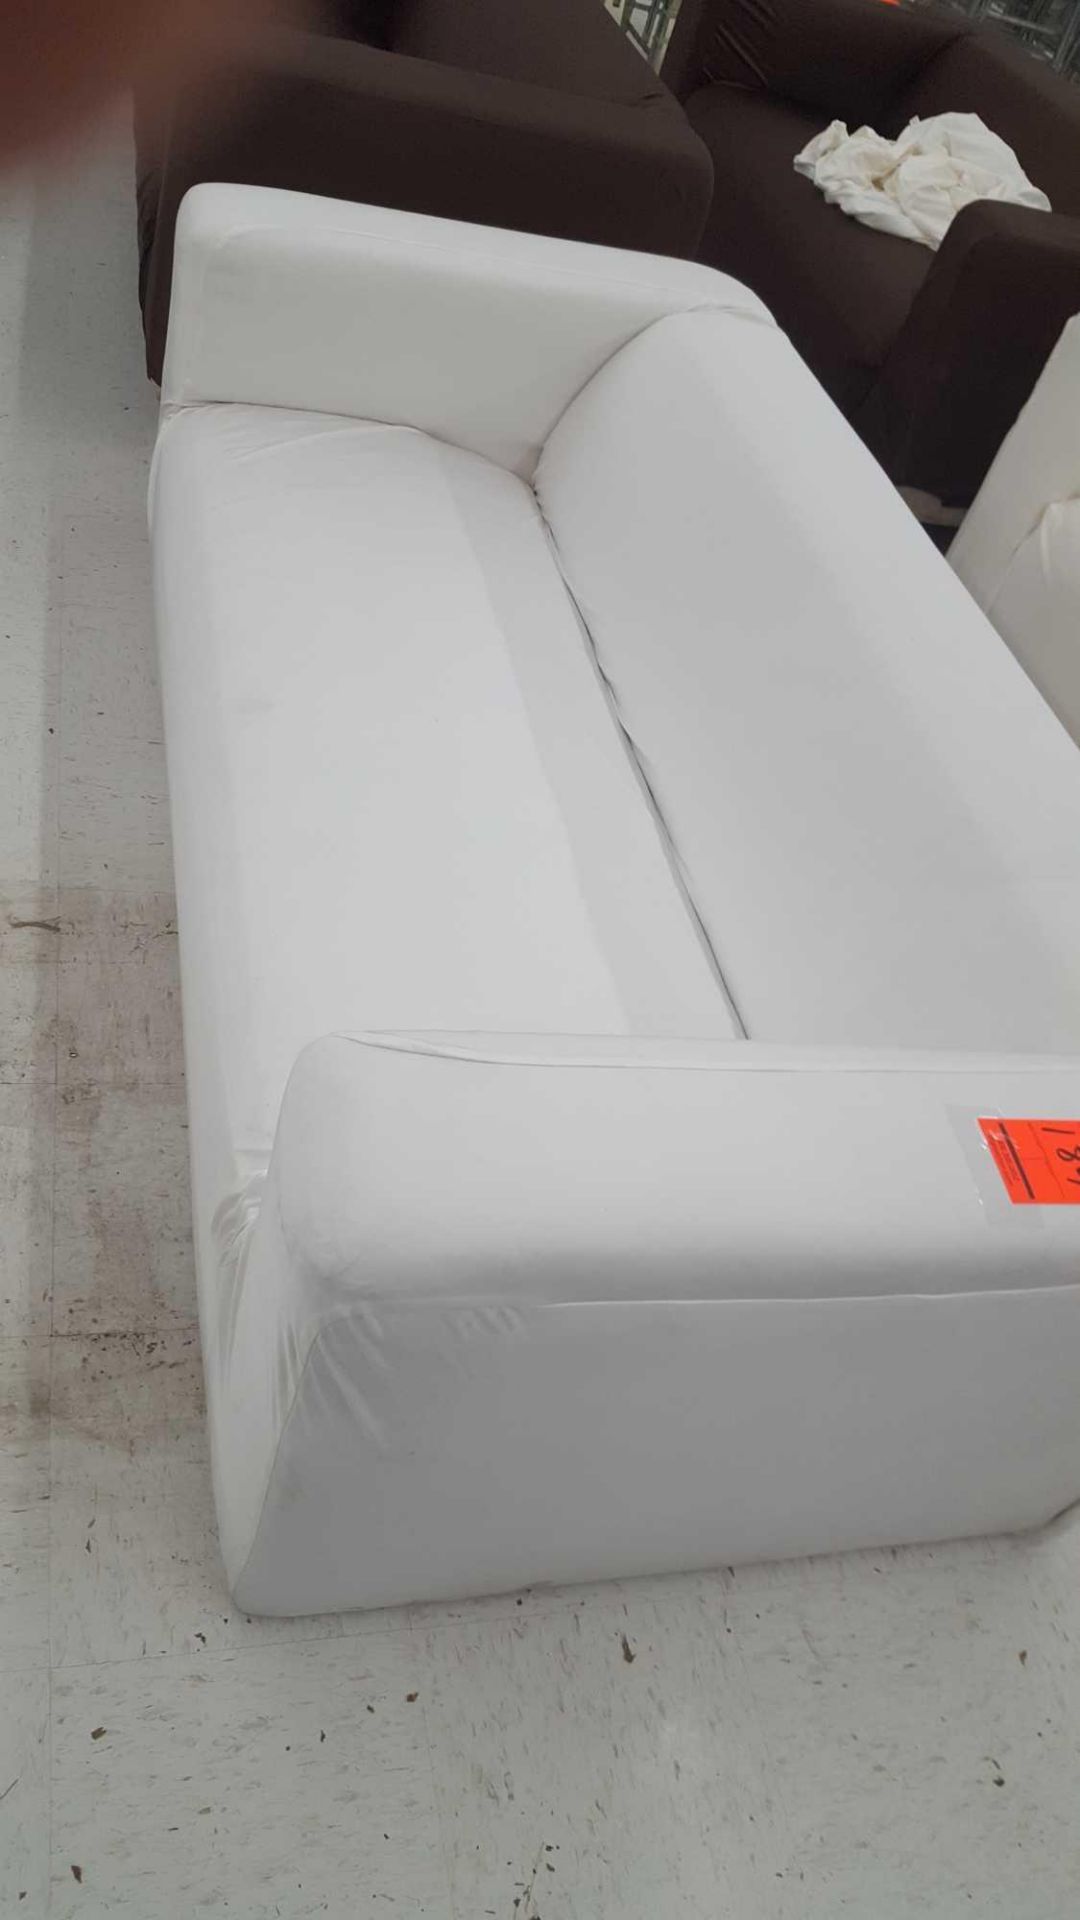 Lot of (3) assorted sofas with white slipcovers, no legs - Image 3 of 4